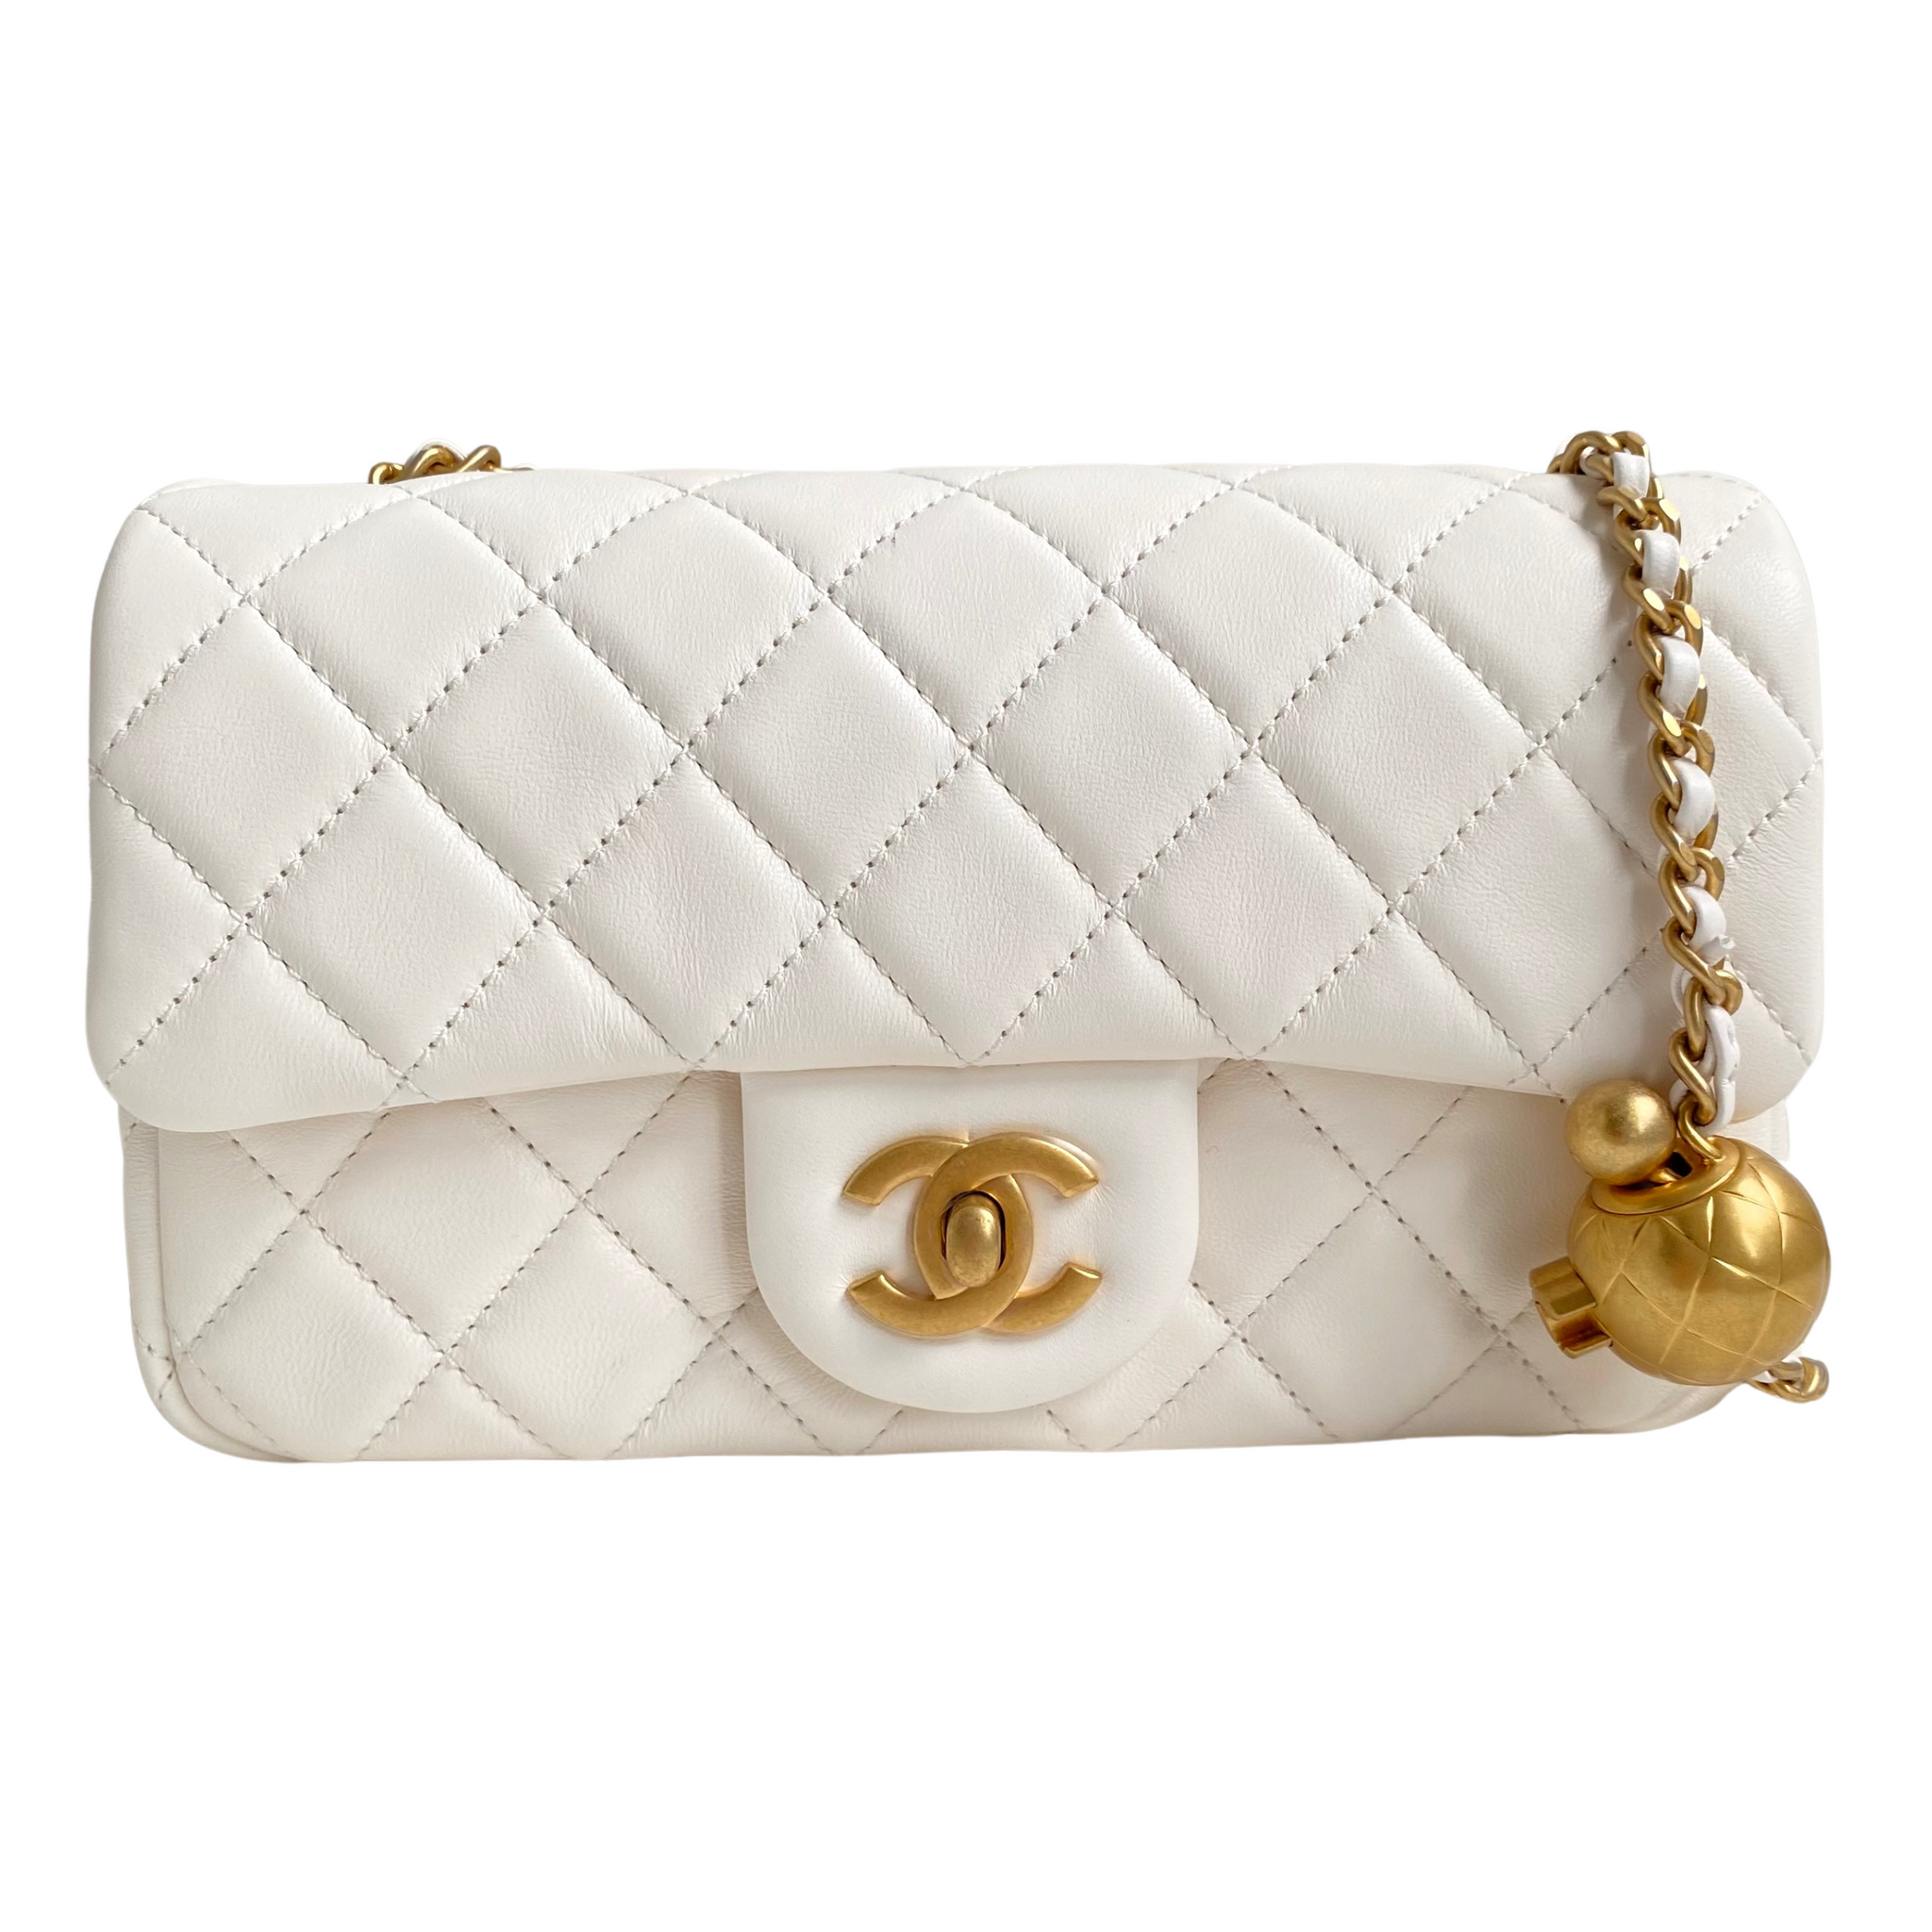 Chanel White Quilted Lambskin Rectangular Mini Classic Flap Bag  Madison  Avenue Couture